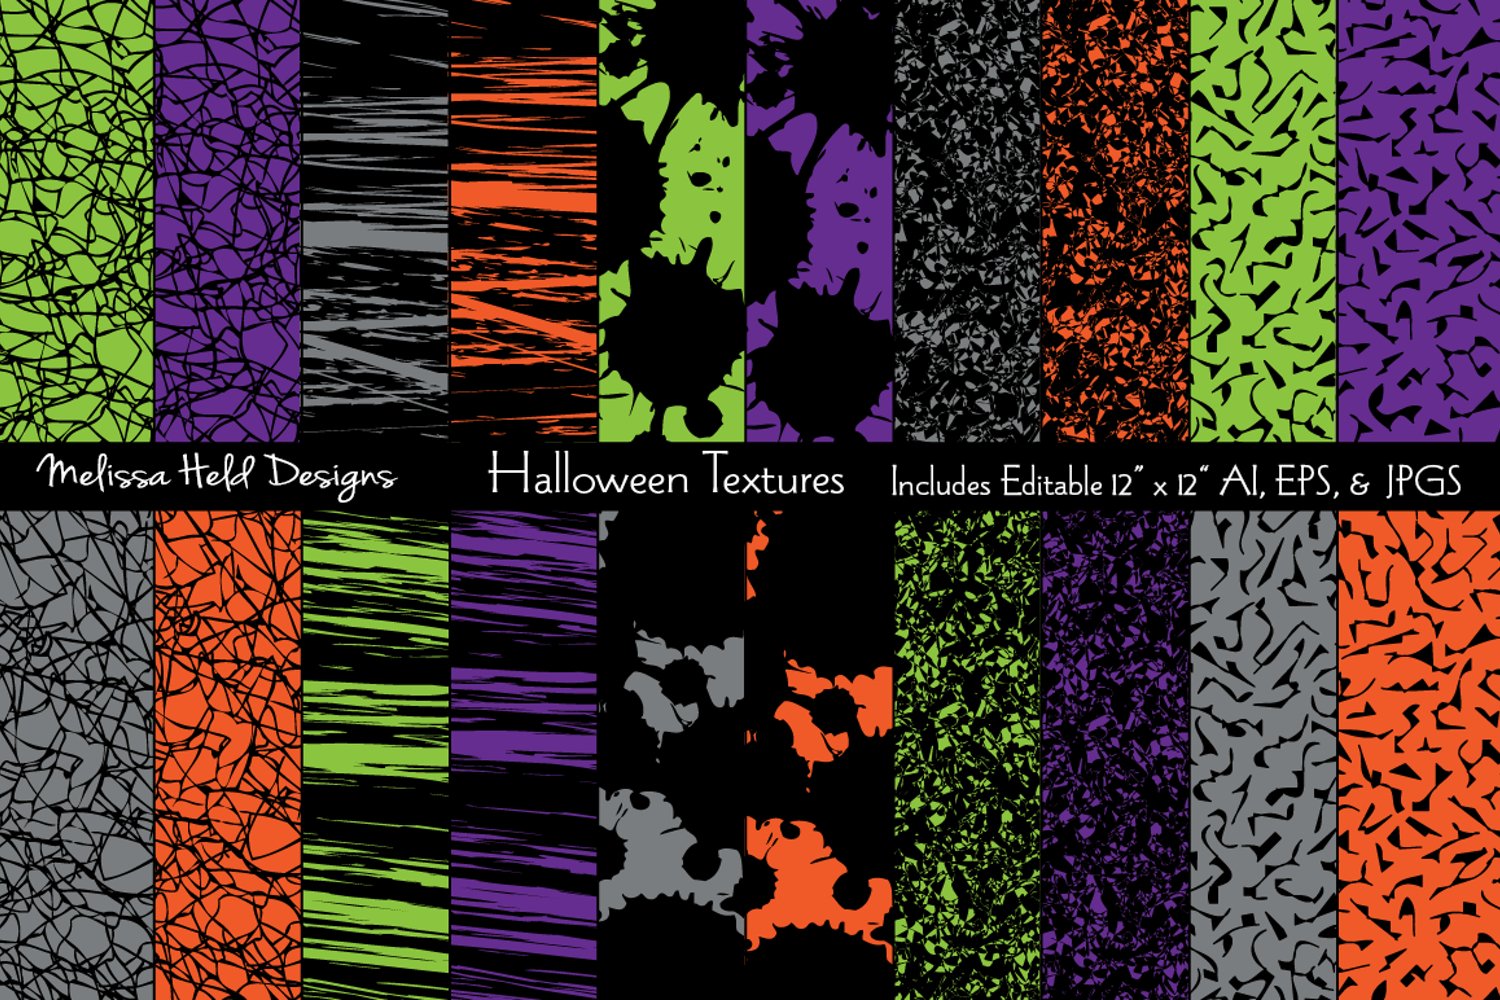 Cover image of Halloween Textures.